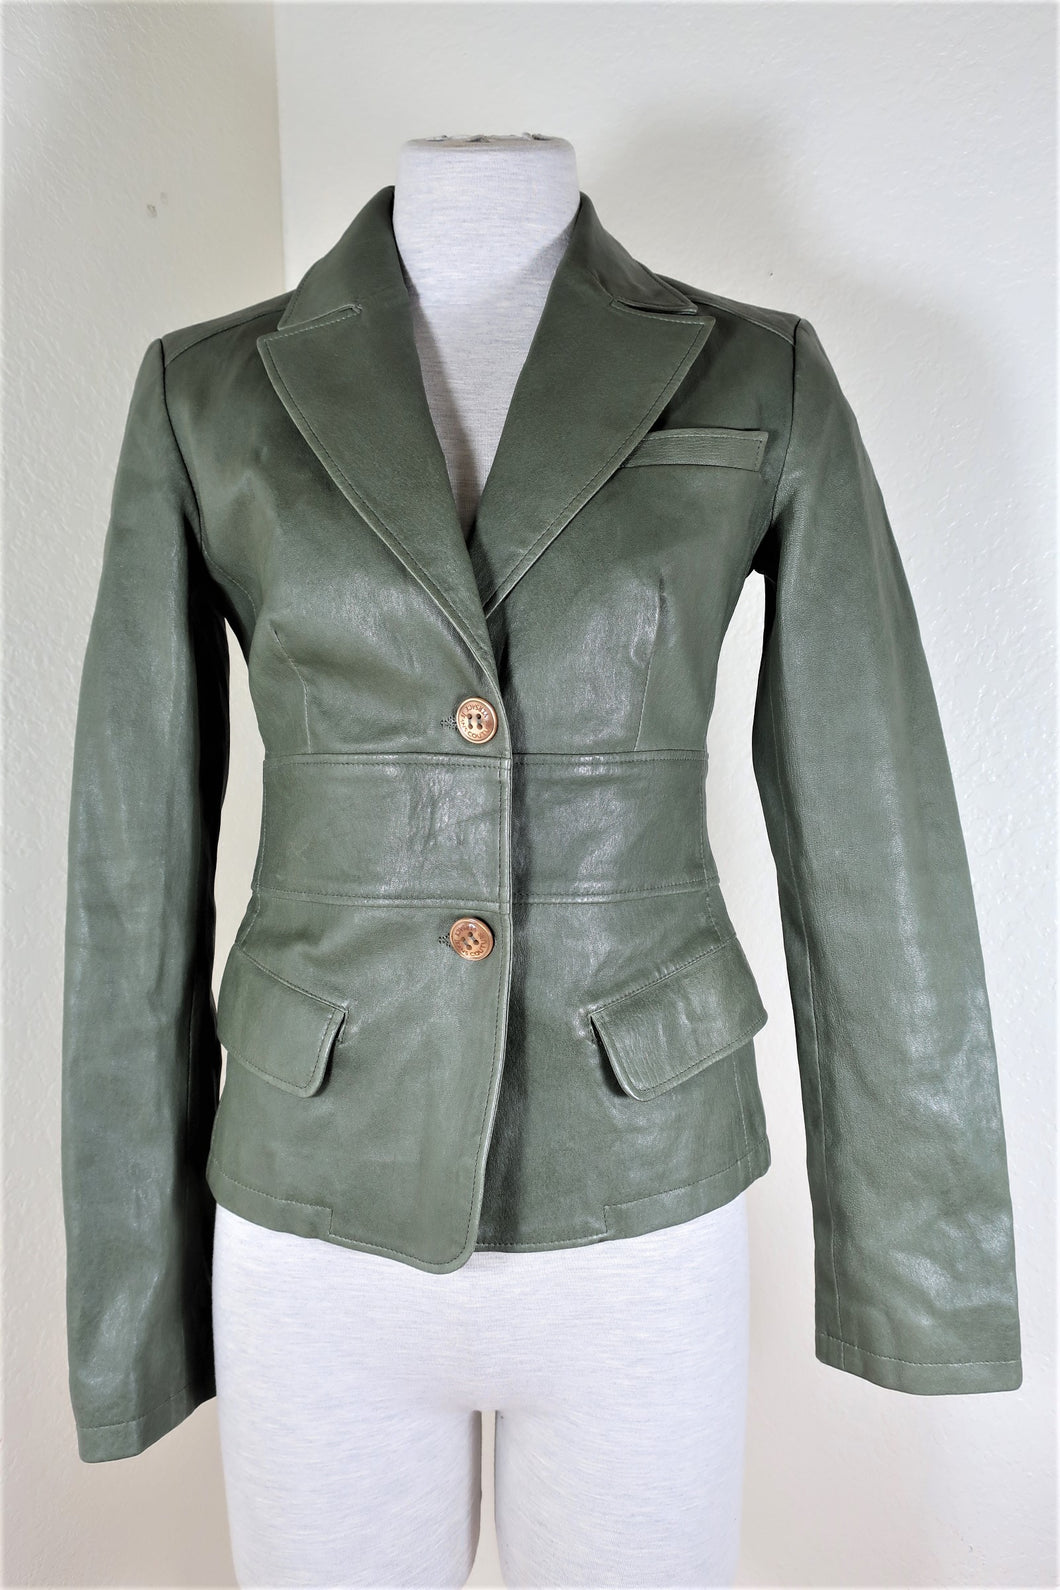 Vintage GIANNI VERSACE Green Leather Blazer Motorcycle Jacket 26 40 Small S 2 4 6